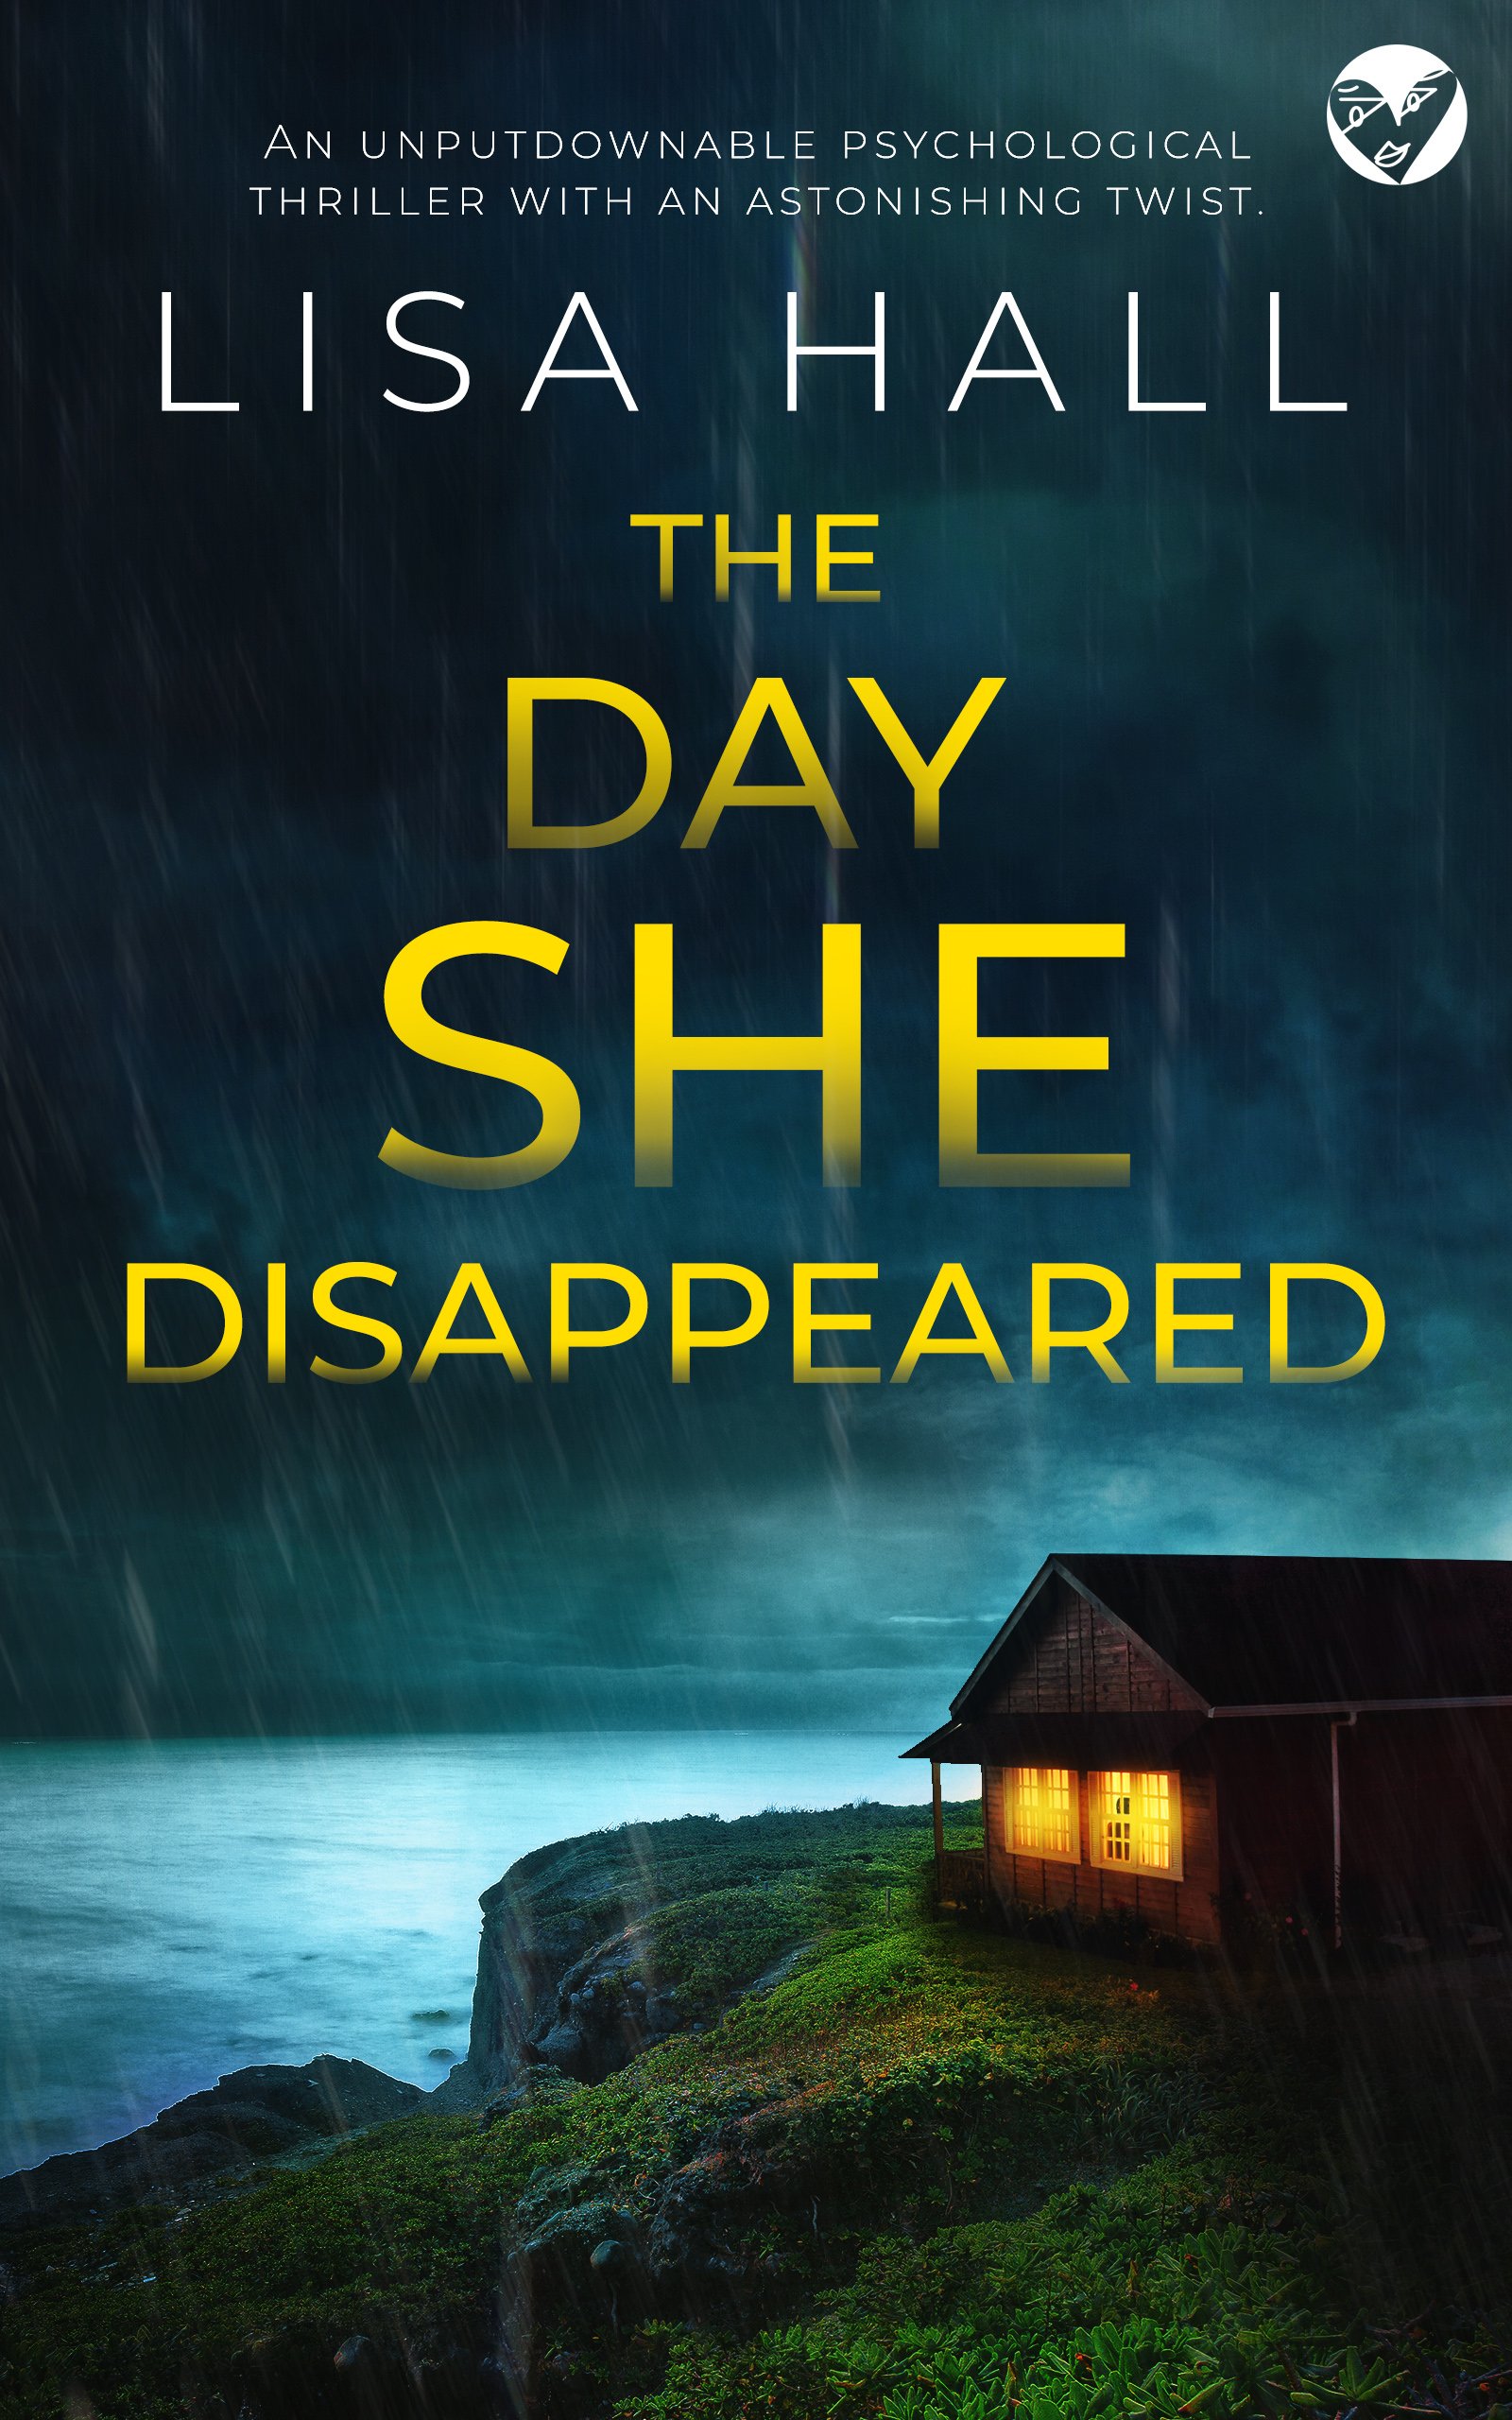 THE DAY SHE DISAPPEARED Cover publish.jpg